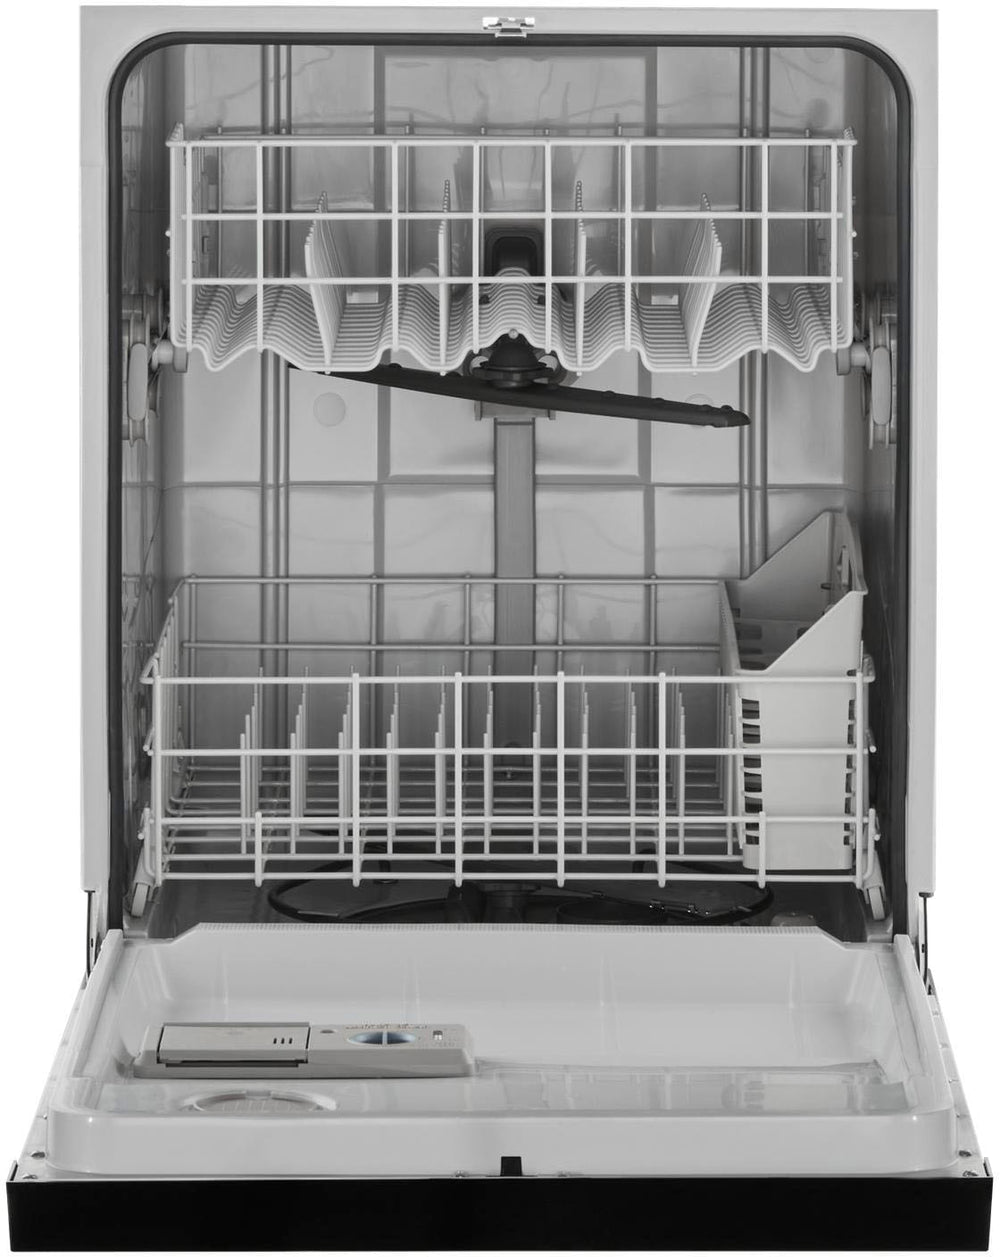 Amana - Front Control Built-In Dishwasher with Triple Filter Wash and 59 dBa - Stainless steel_1